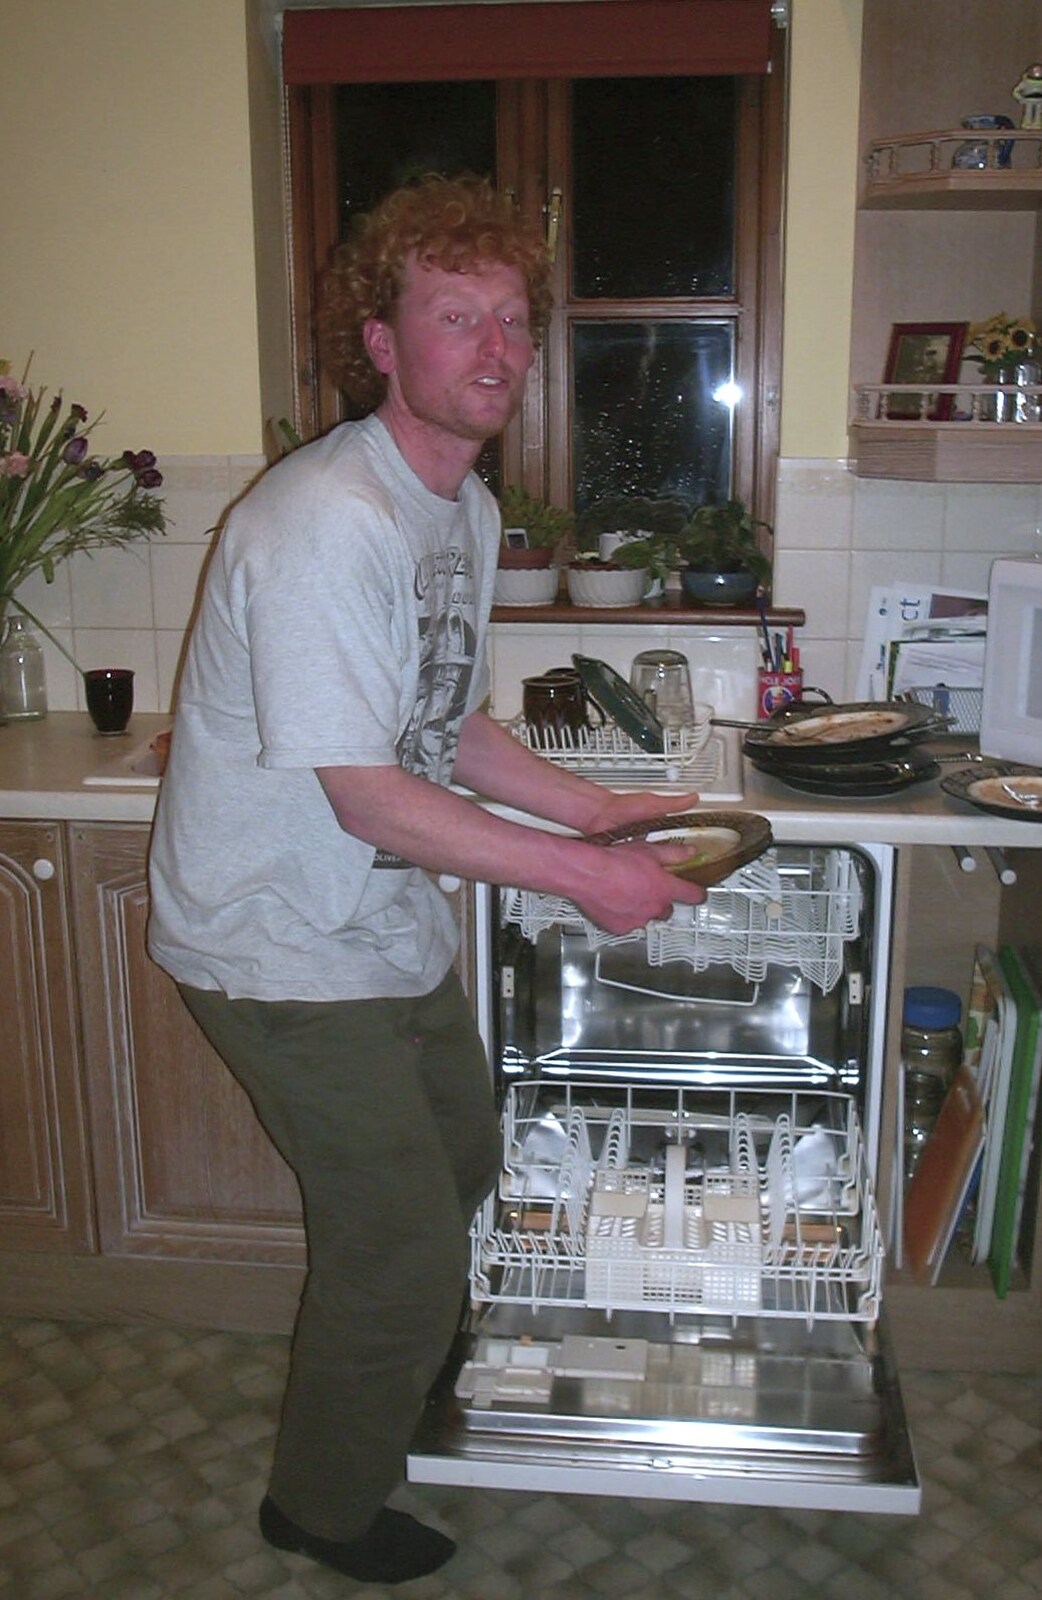 Wavy helps to load the dishwasher up from Suey's Actual Birthday, Thorndon, Suffolk - 2nd April 2002